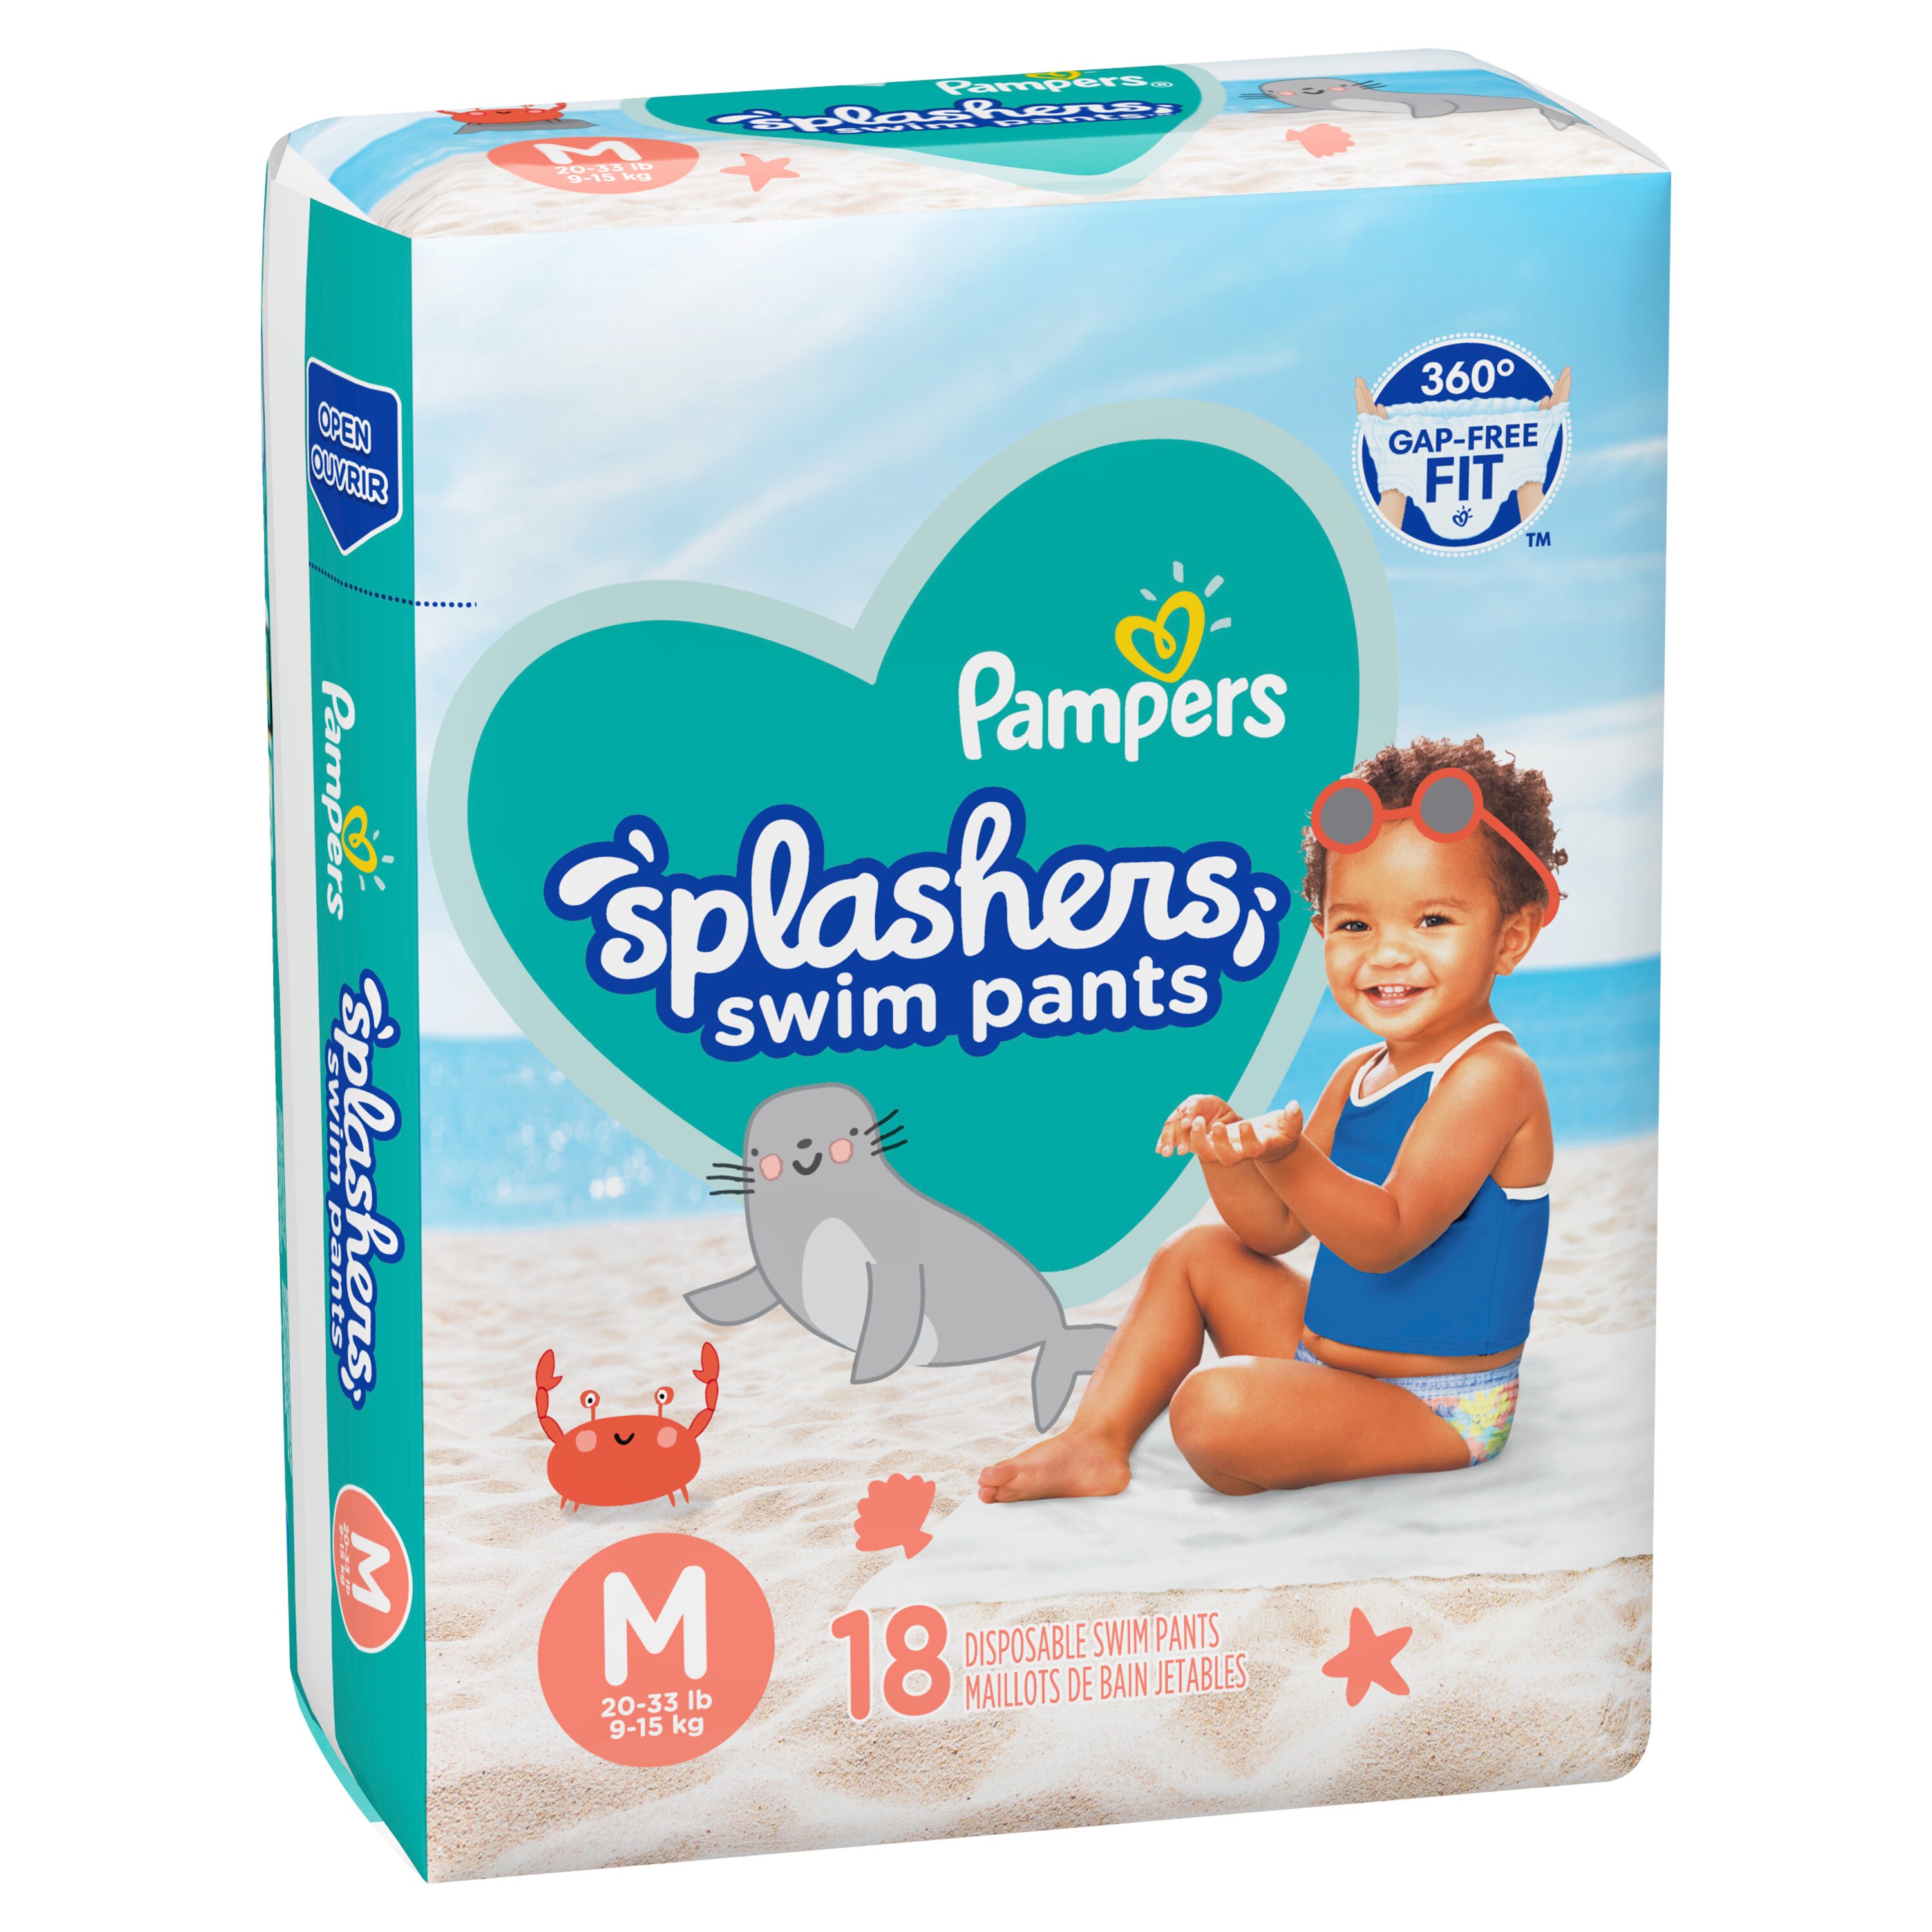 Pampers Splashers Disposable Swim Pants Diaper Small 20 Count Small 13-24 lbs 